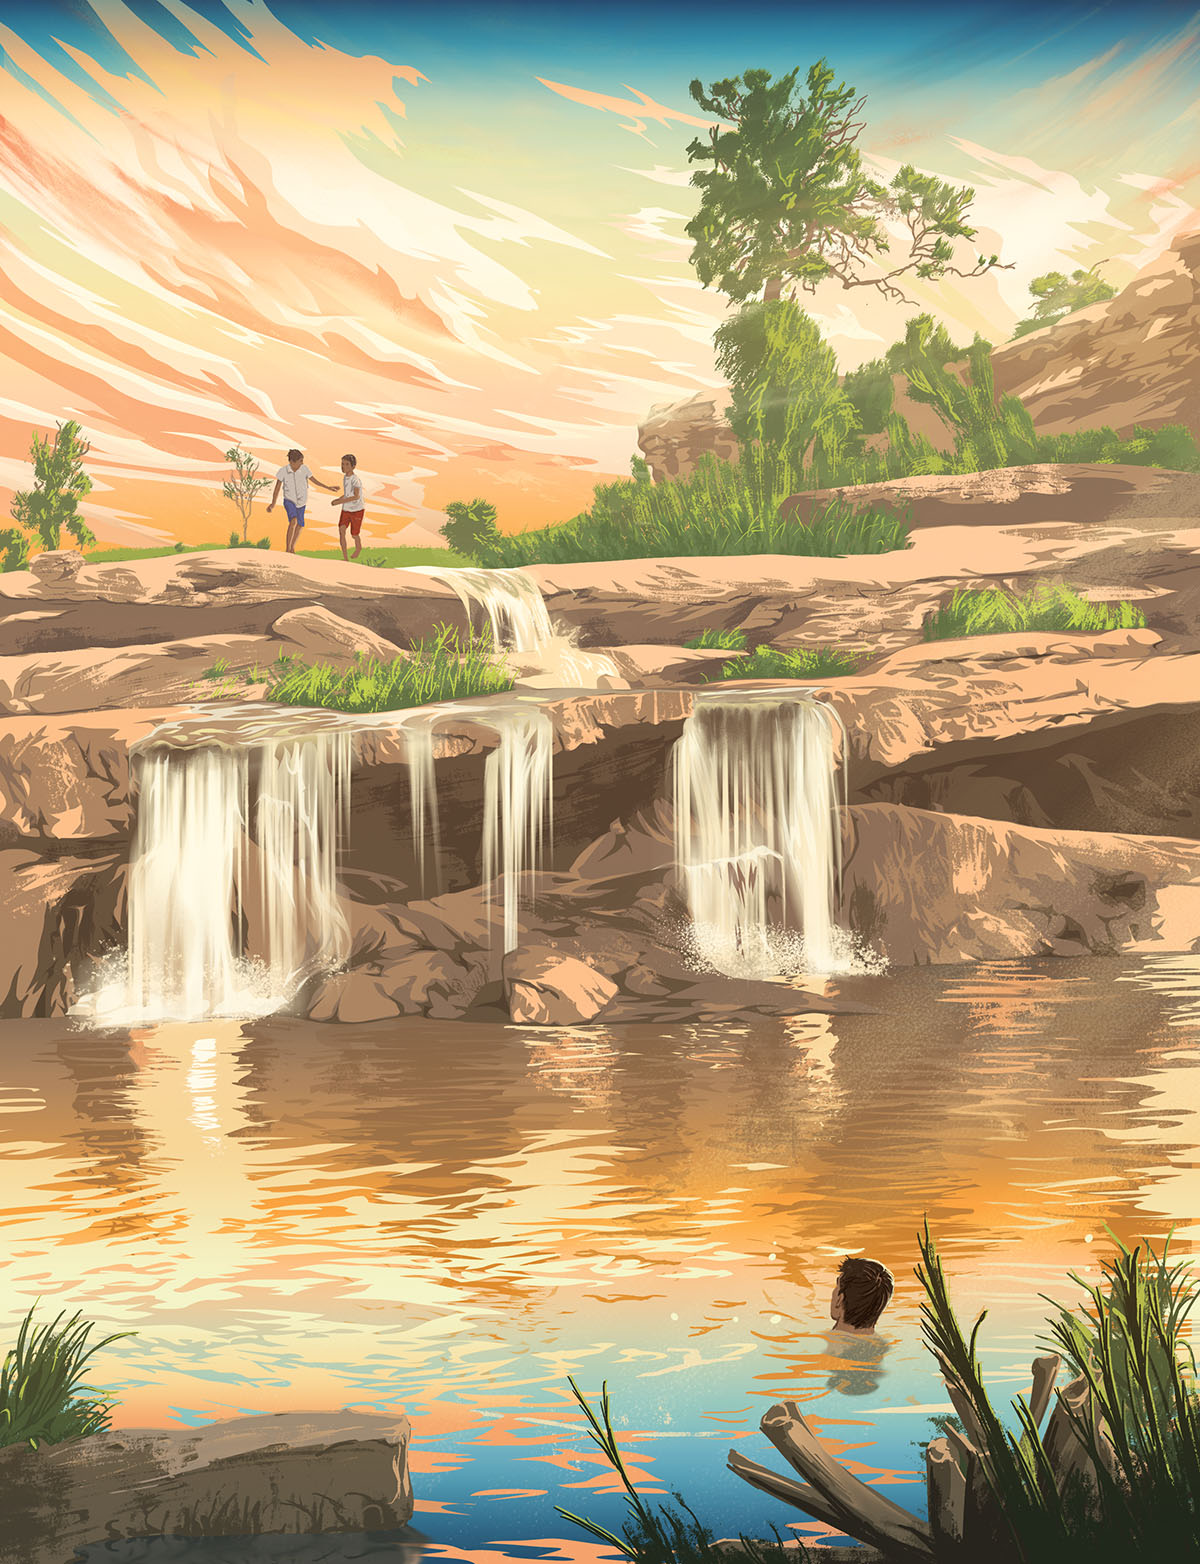 An illustration of people standing and swimming in falls over rocks